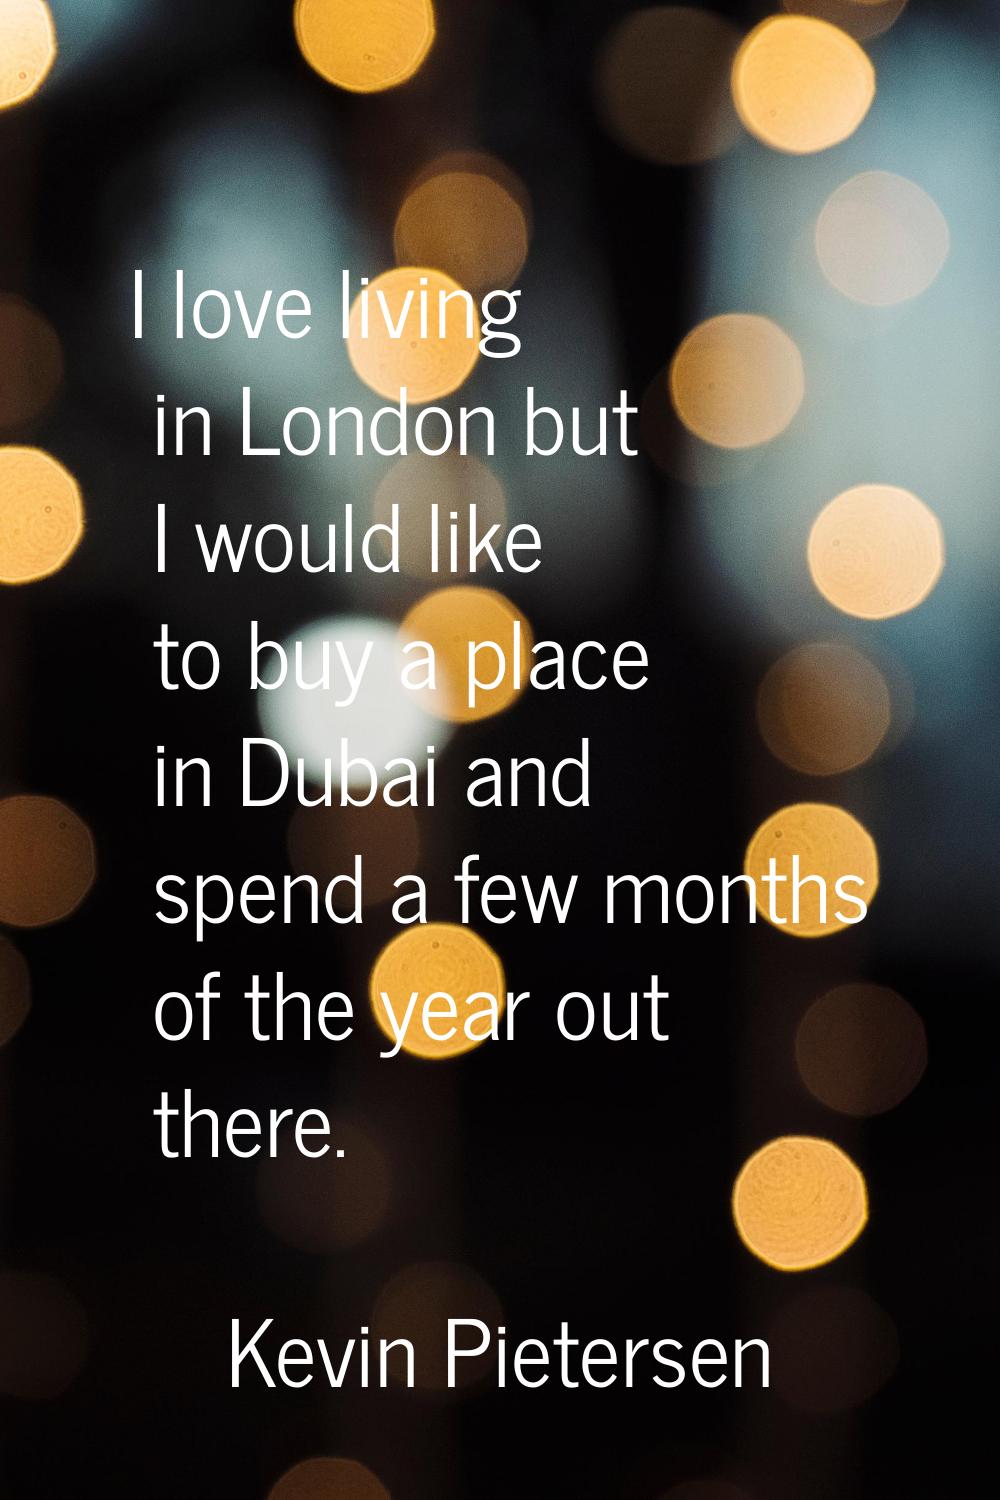 I love living in London but I would like to buy a place in Dubai and spend a few months of the year